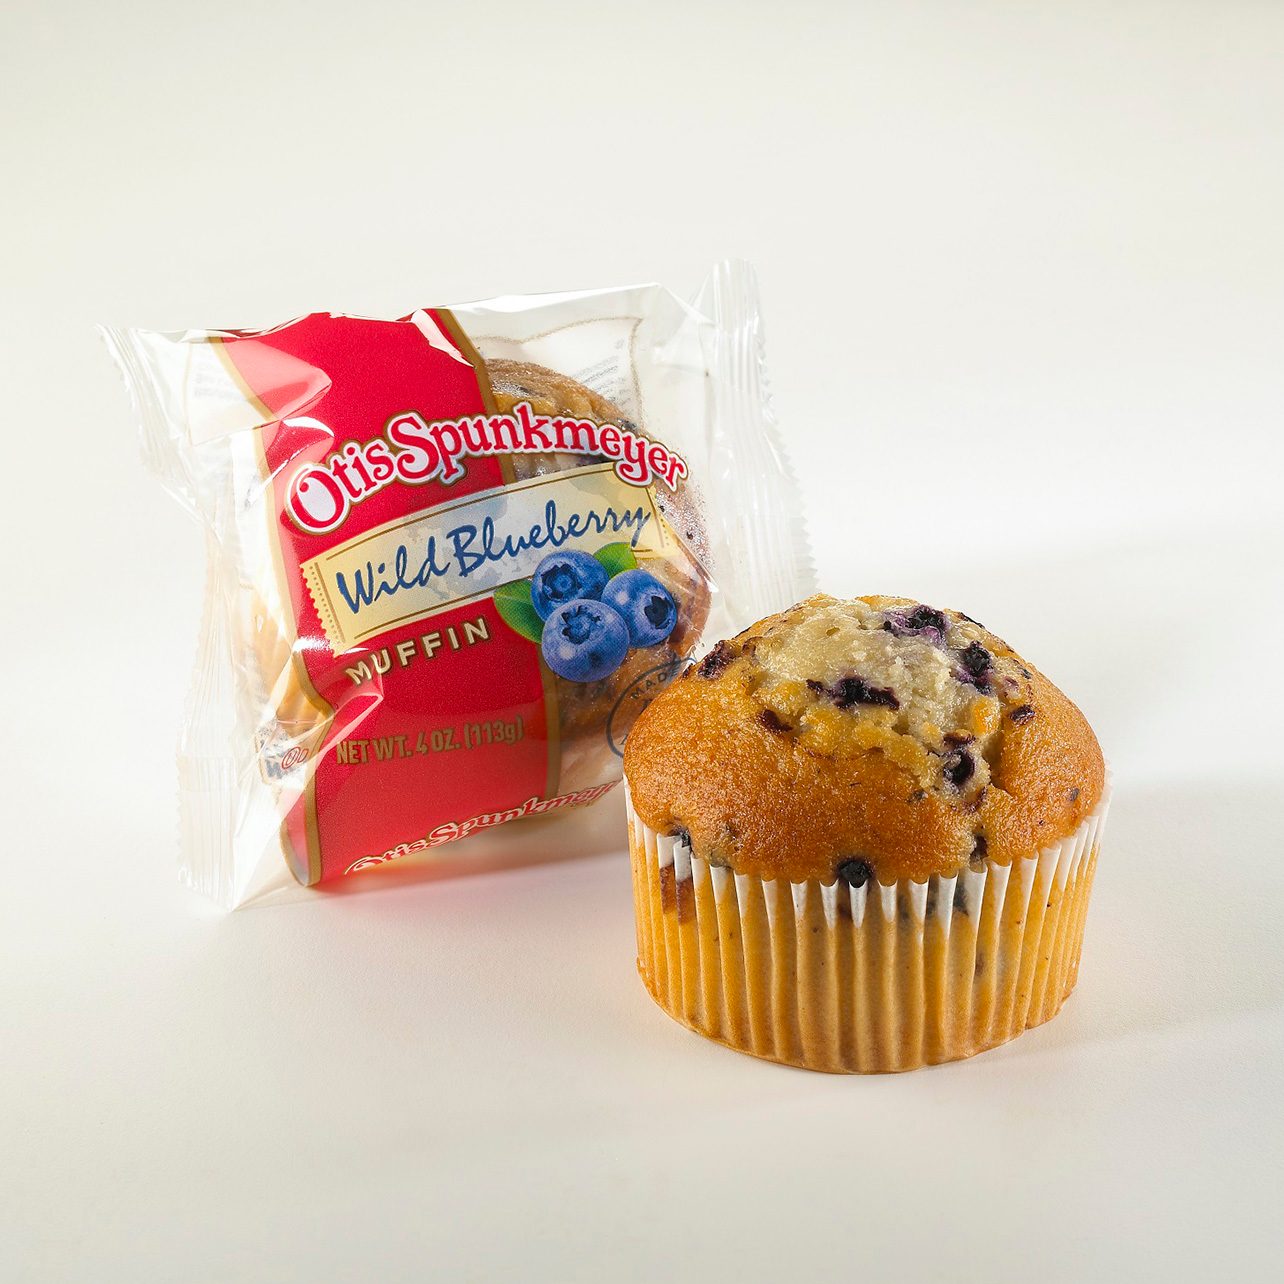 Baking cup, Food, Ingredient, Cake, Recipe, Cuisine, Muffin, Wrapper